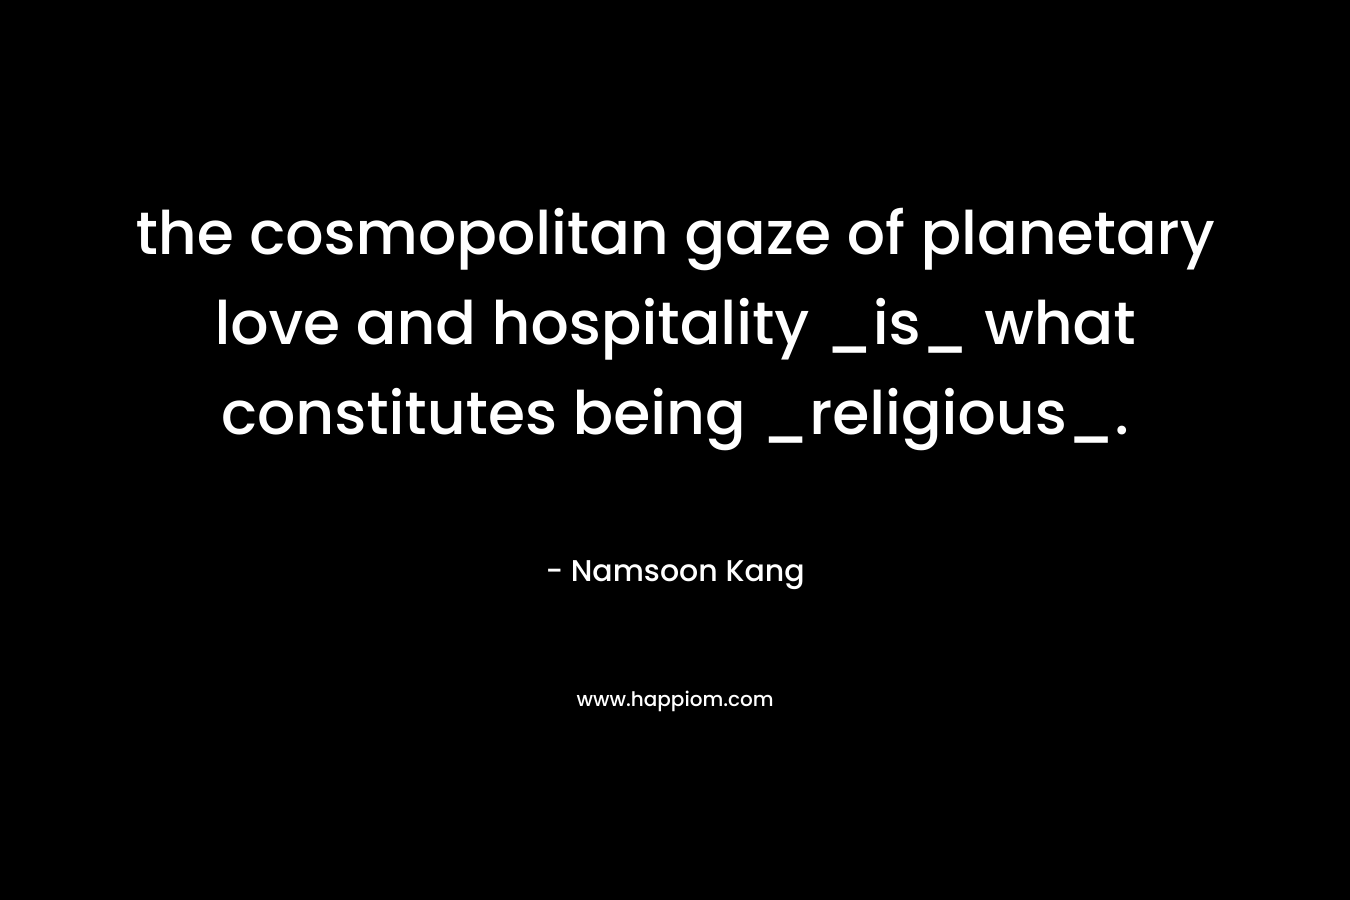 the cosmopolitan gaze of planetary love and hospitality _is_ what constitutes being _religious_.